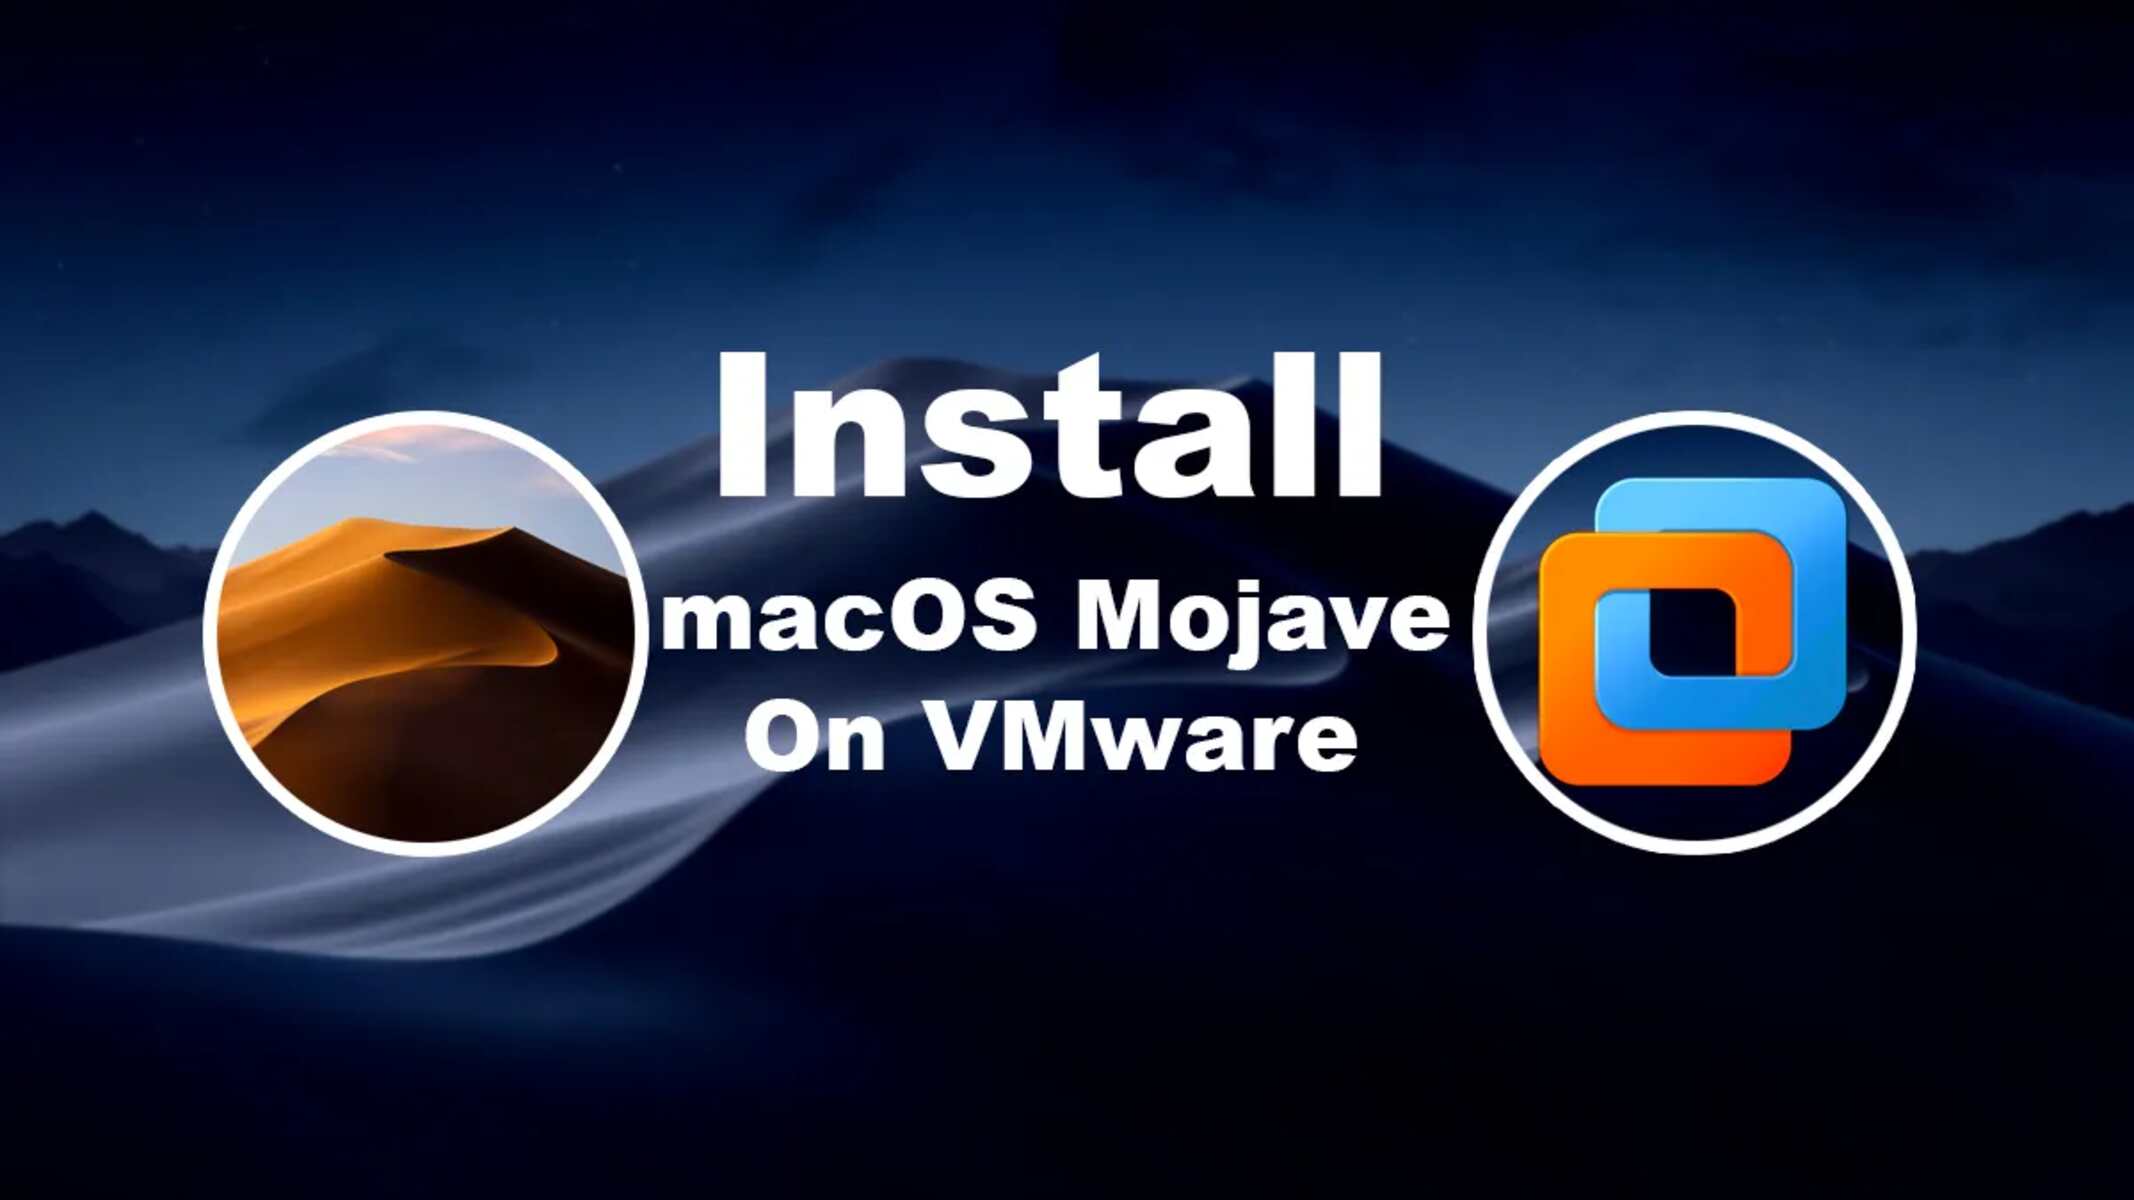 How To Set Up MacOS 10.14 Mojave In VMware Workstation Pro 12